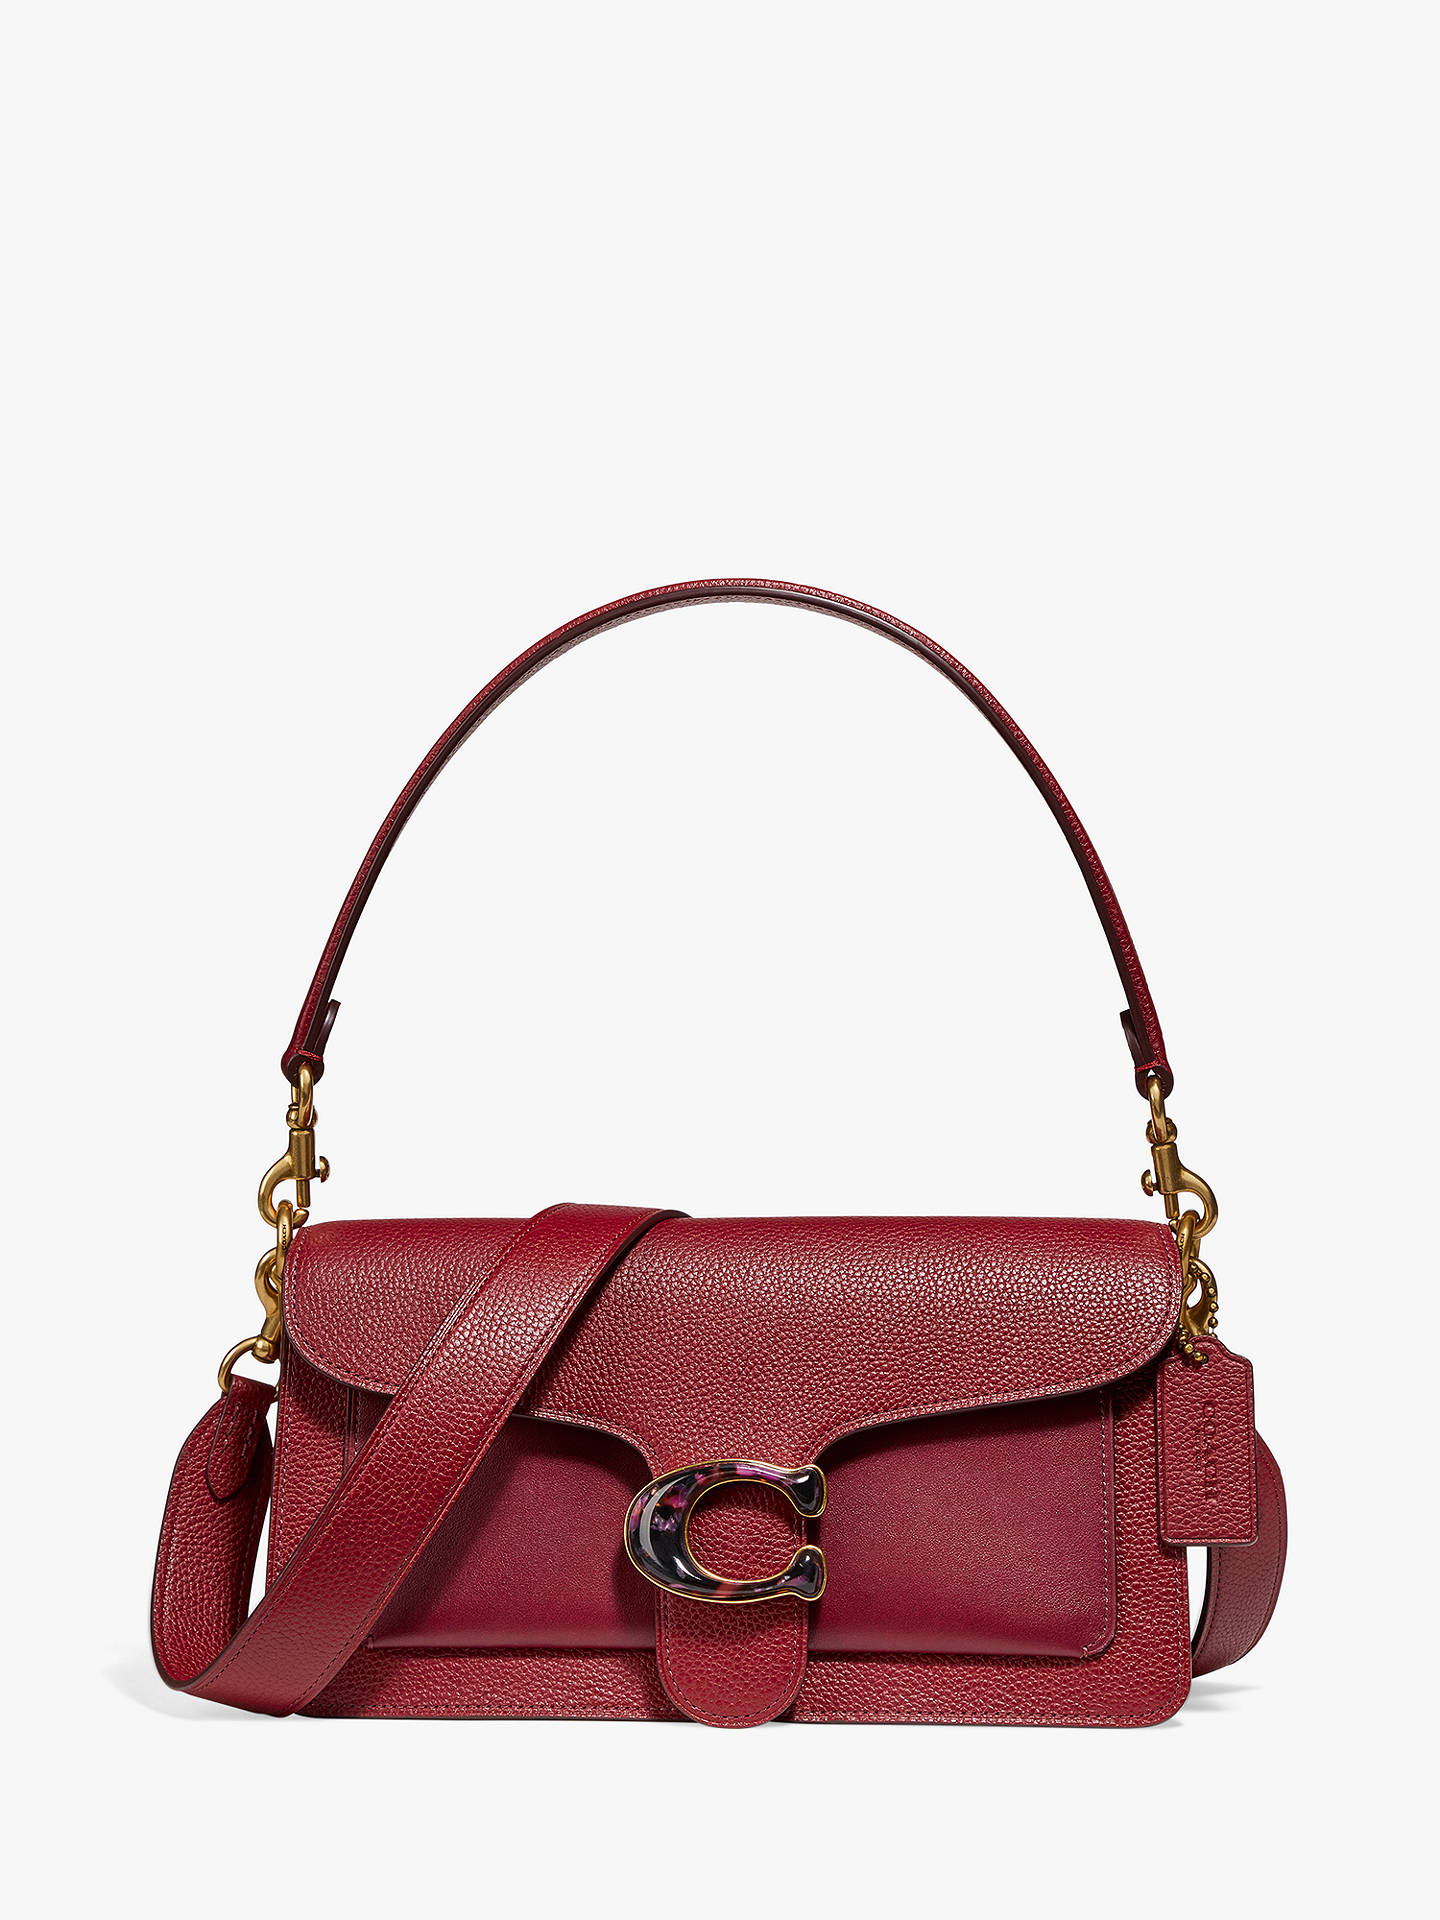 Coach Tabby 26 Leather Shoulder Bag, Deep Red at John Lewis & Partners